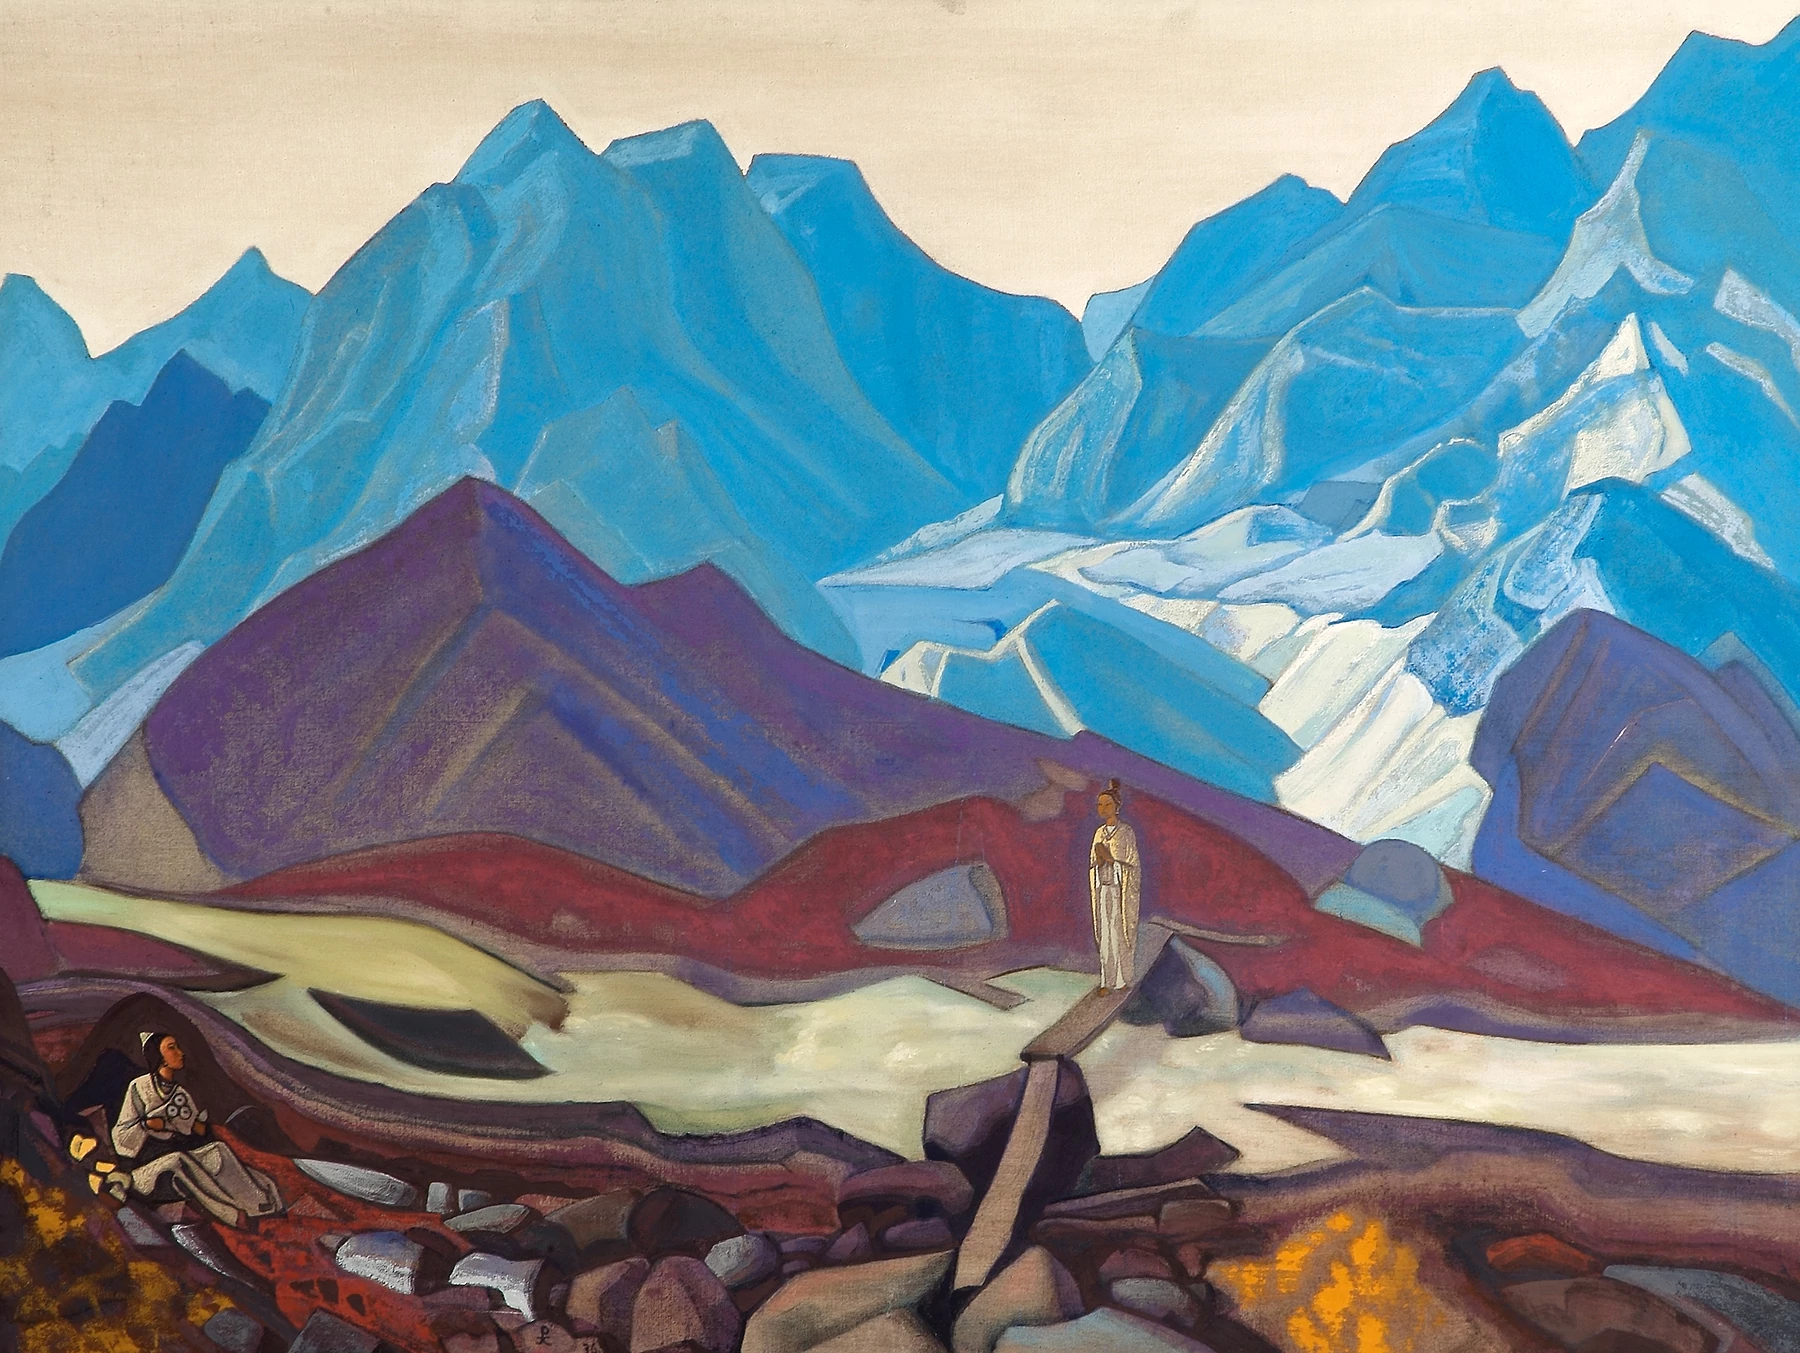 From Beyond, Nicholas Roerich